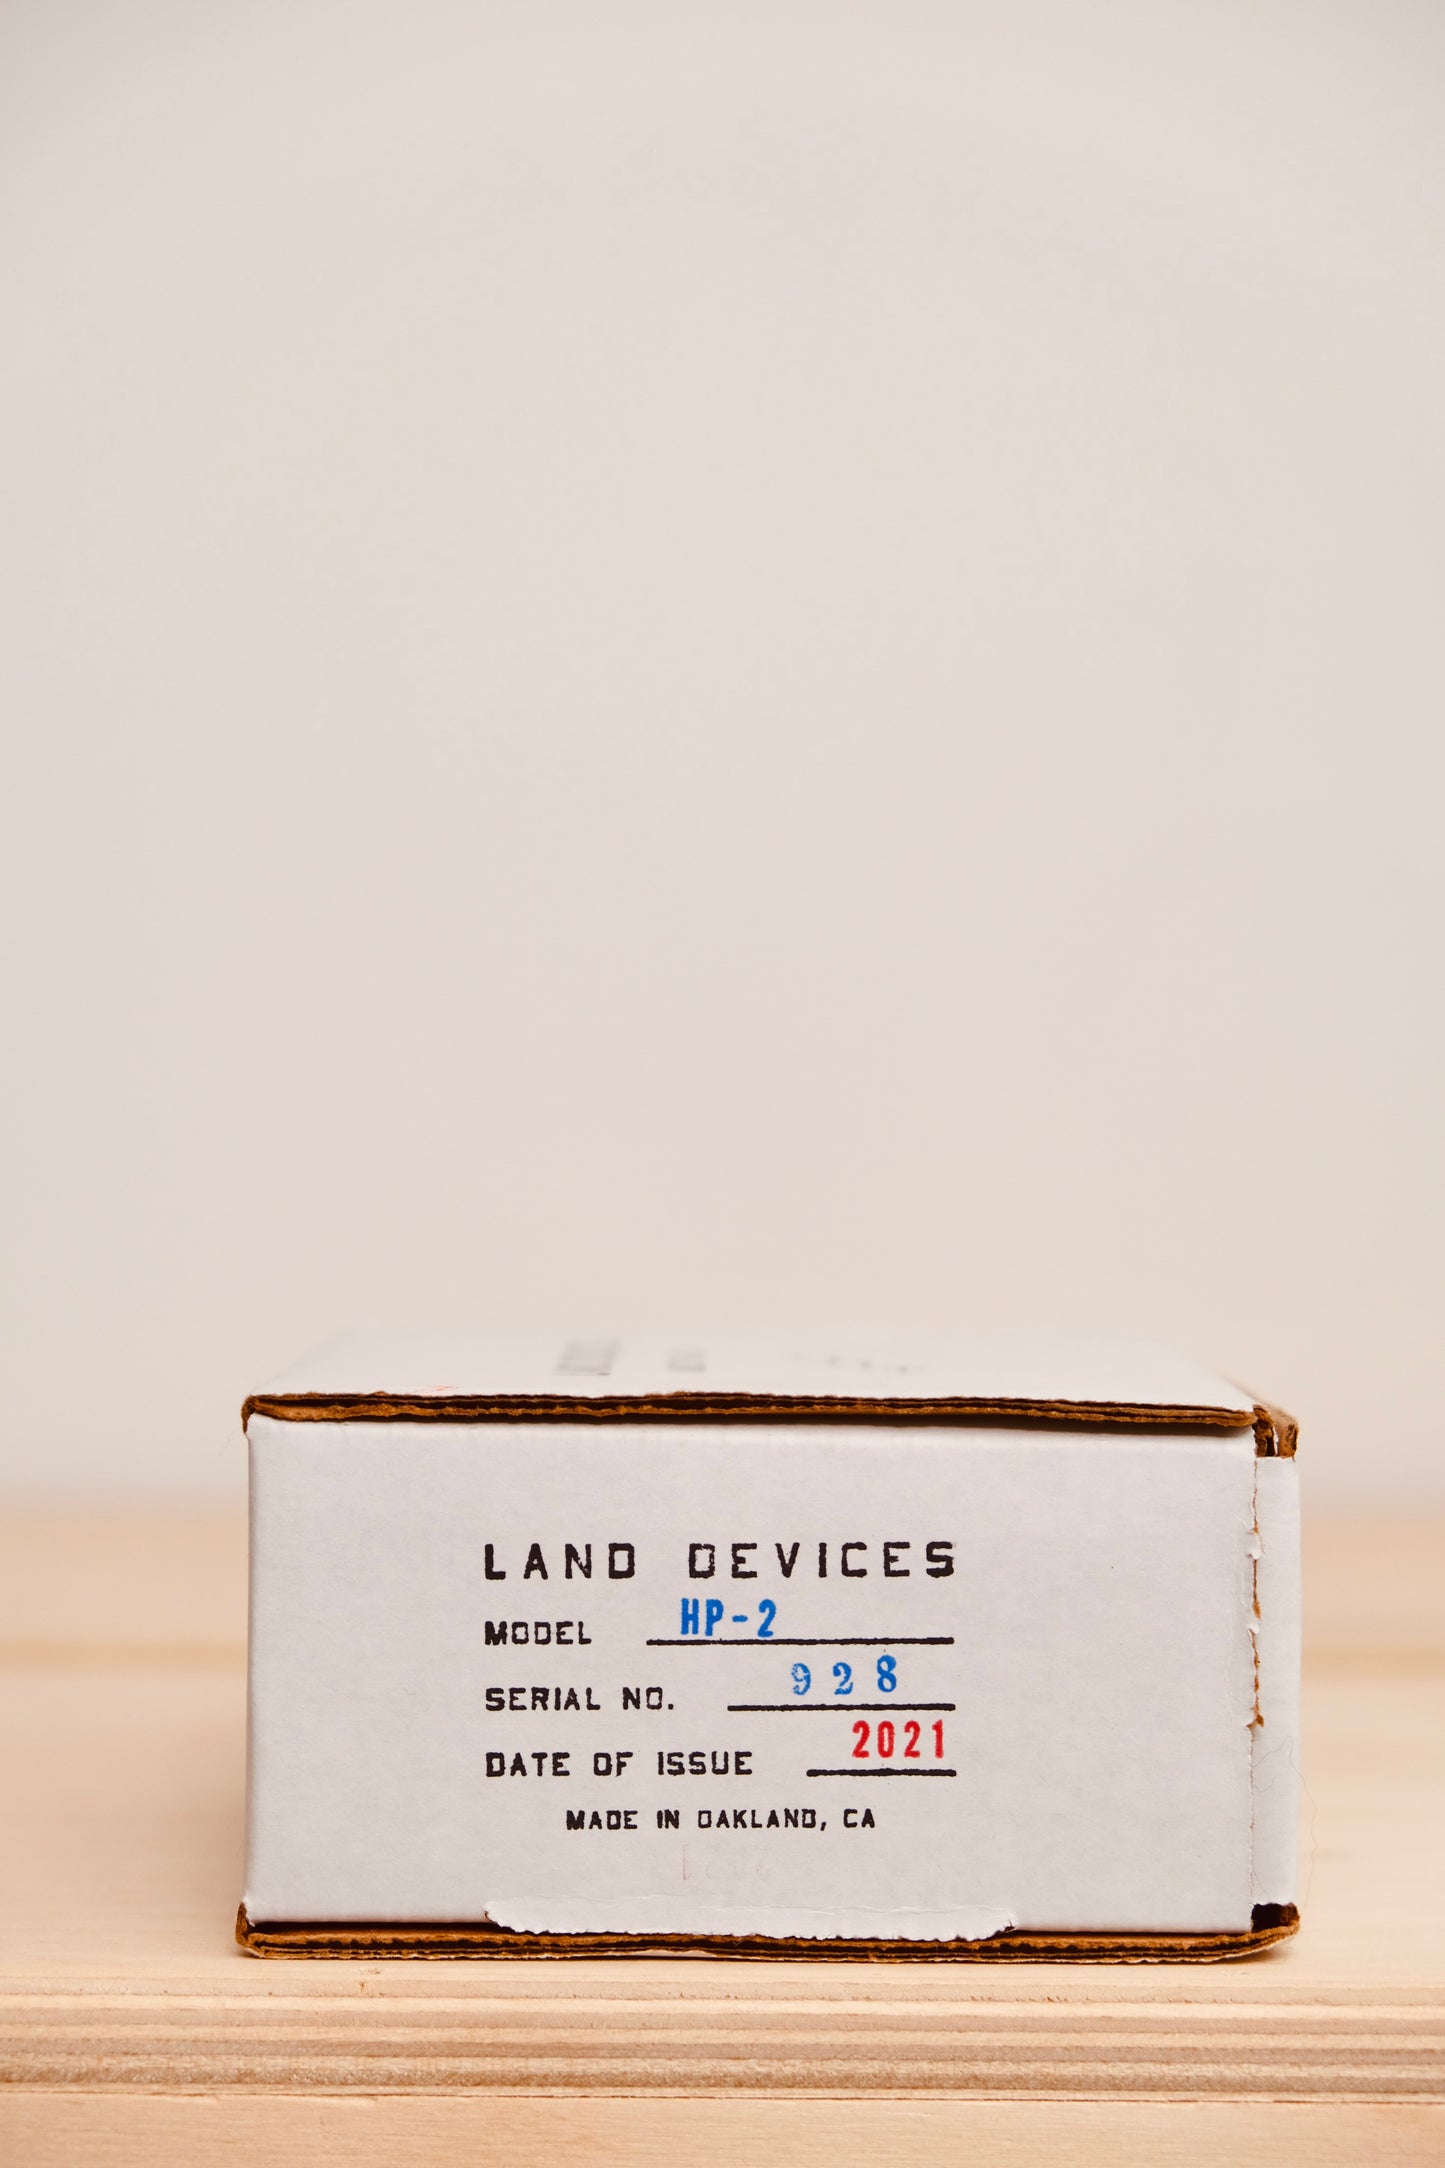 Land Devices April Fool's Day HP-2